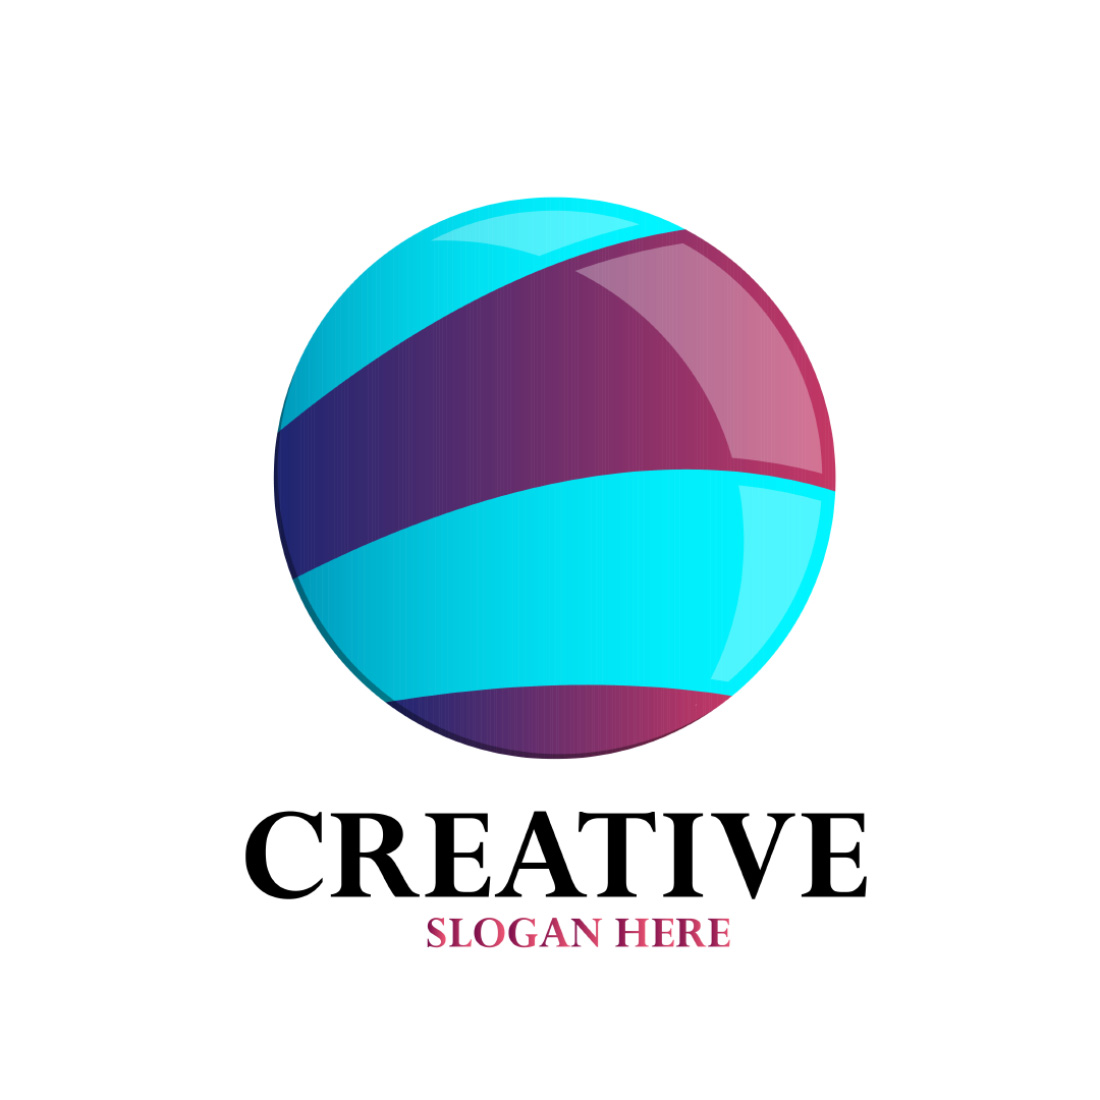 Modern Gradient Circle Logo for Company cover image.